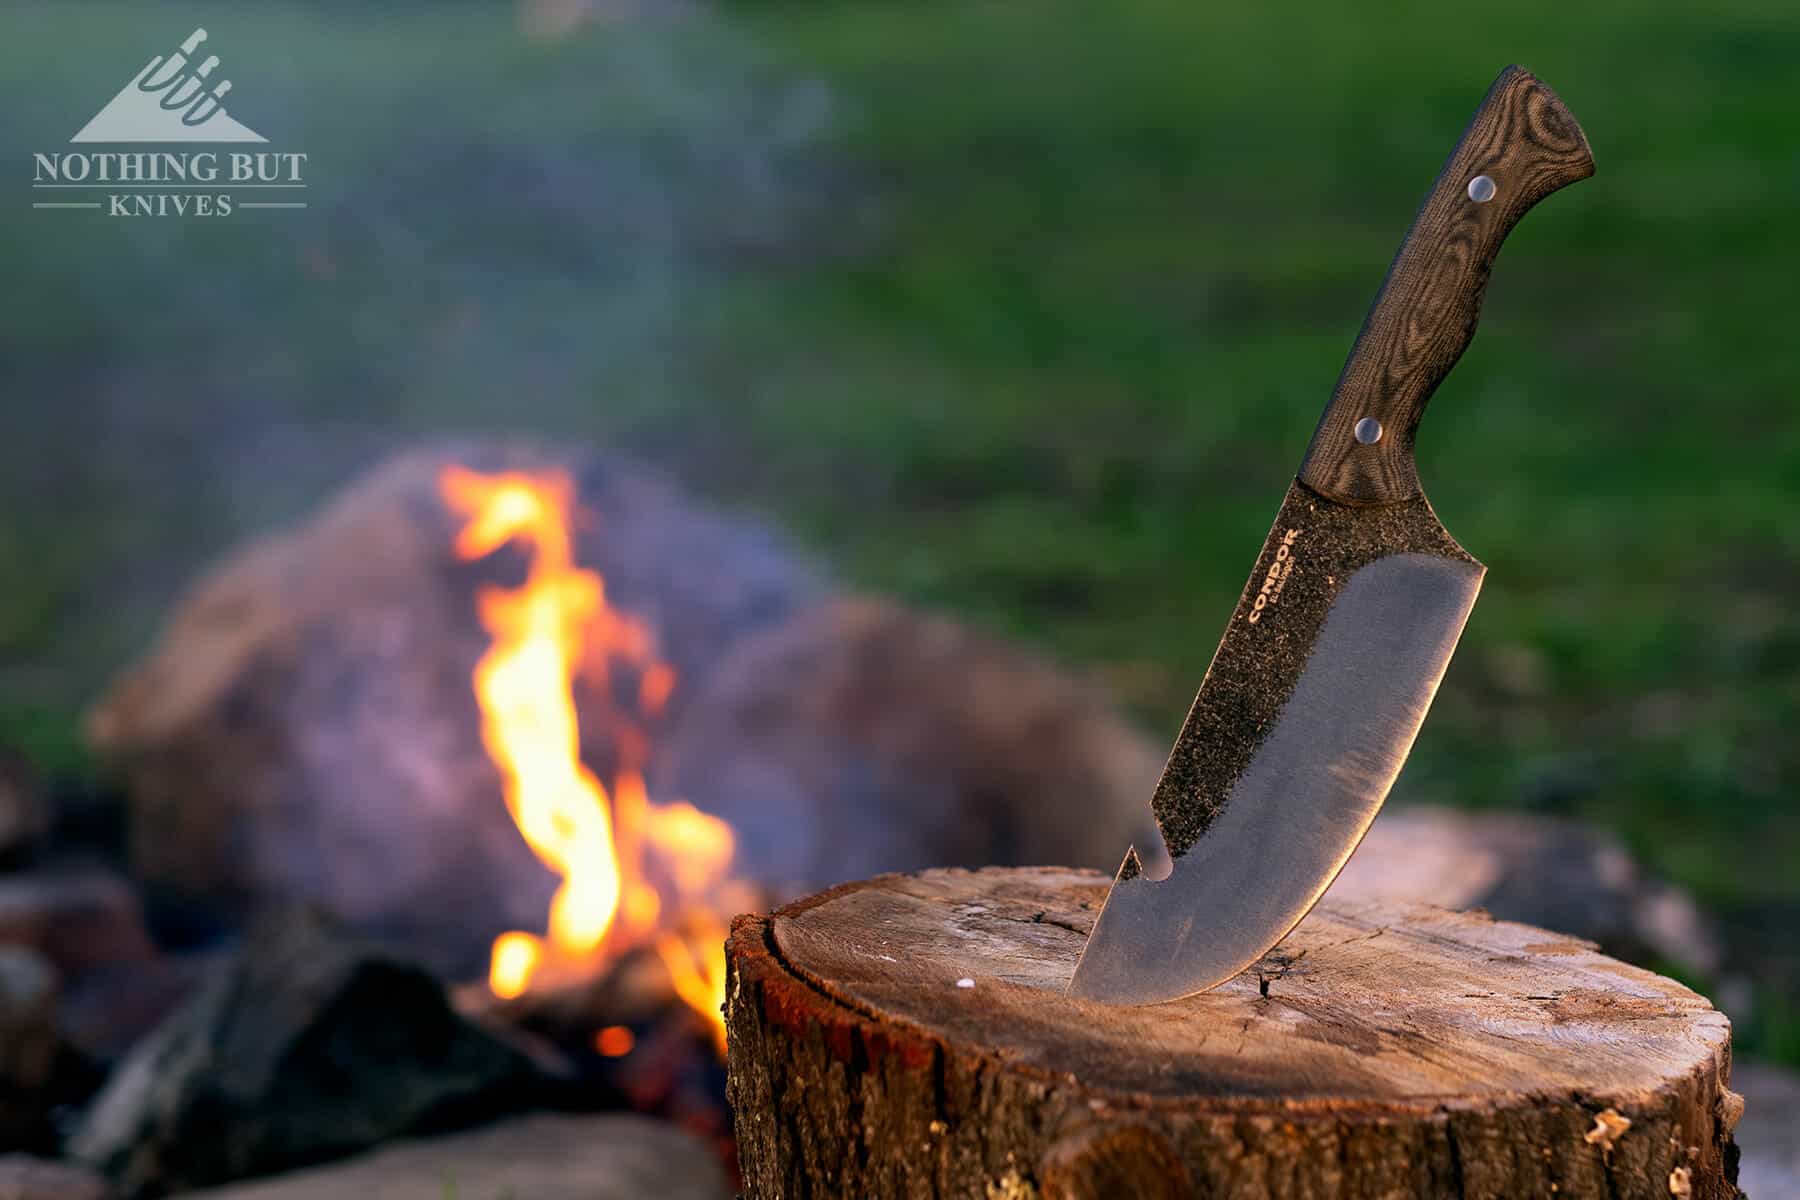 This Bushcraft Chef Knife Hybrid May Be The Ultimate Option For Survival Food Prep Or Just A Real Practical Camping Knife.